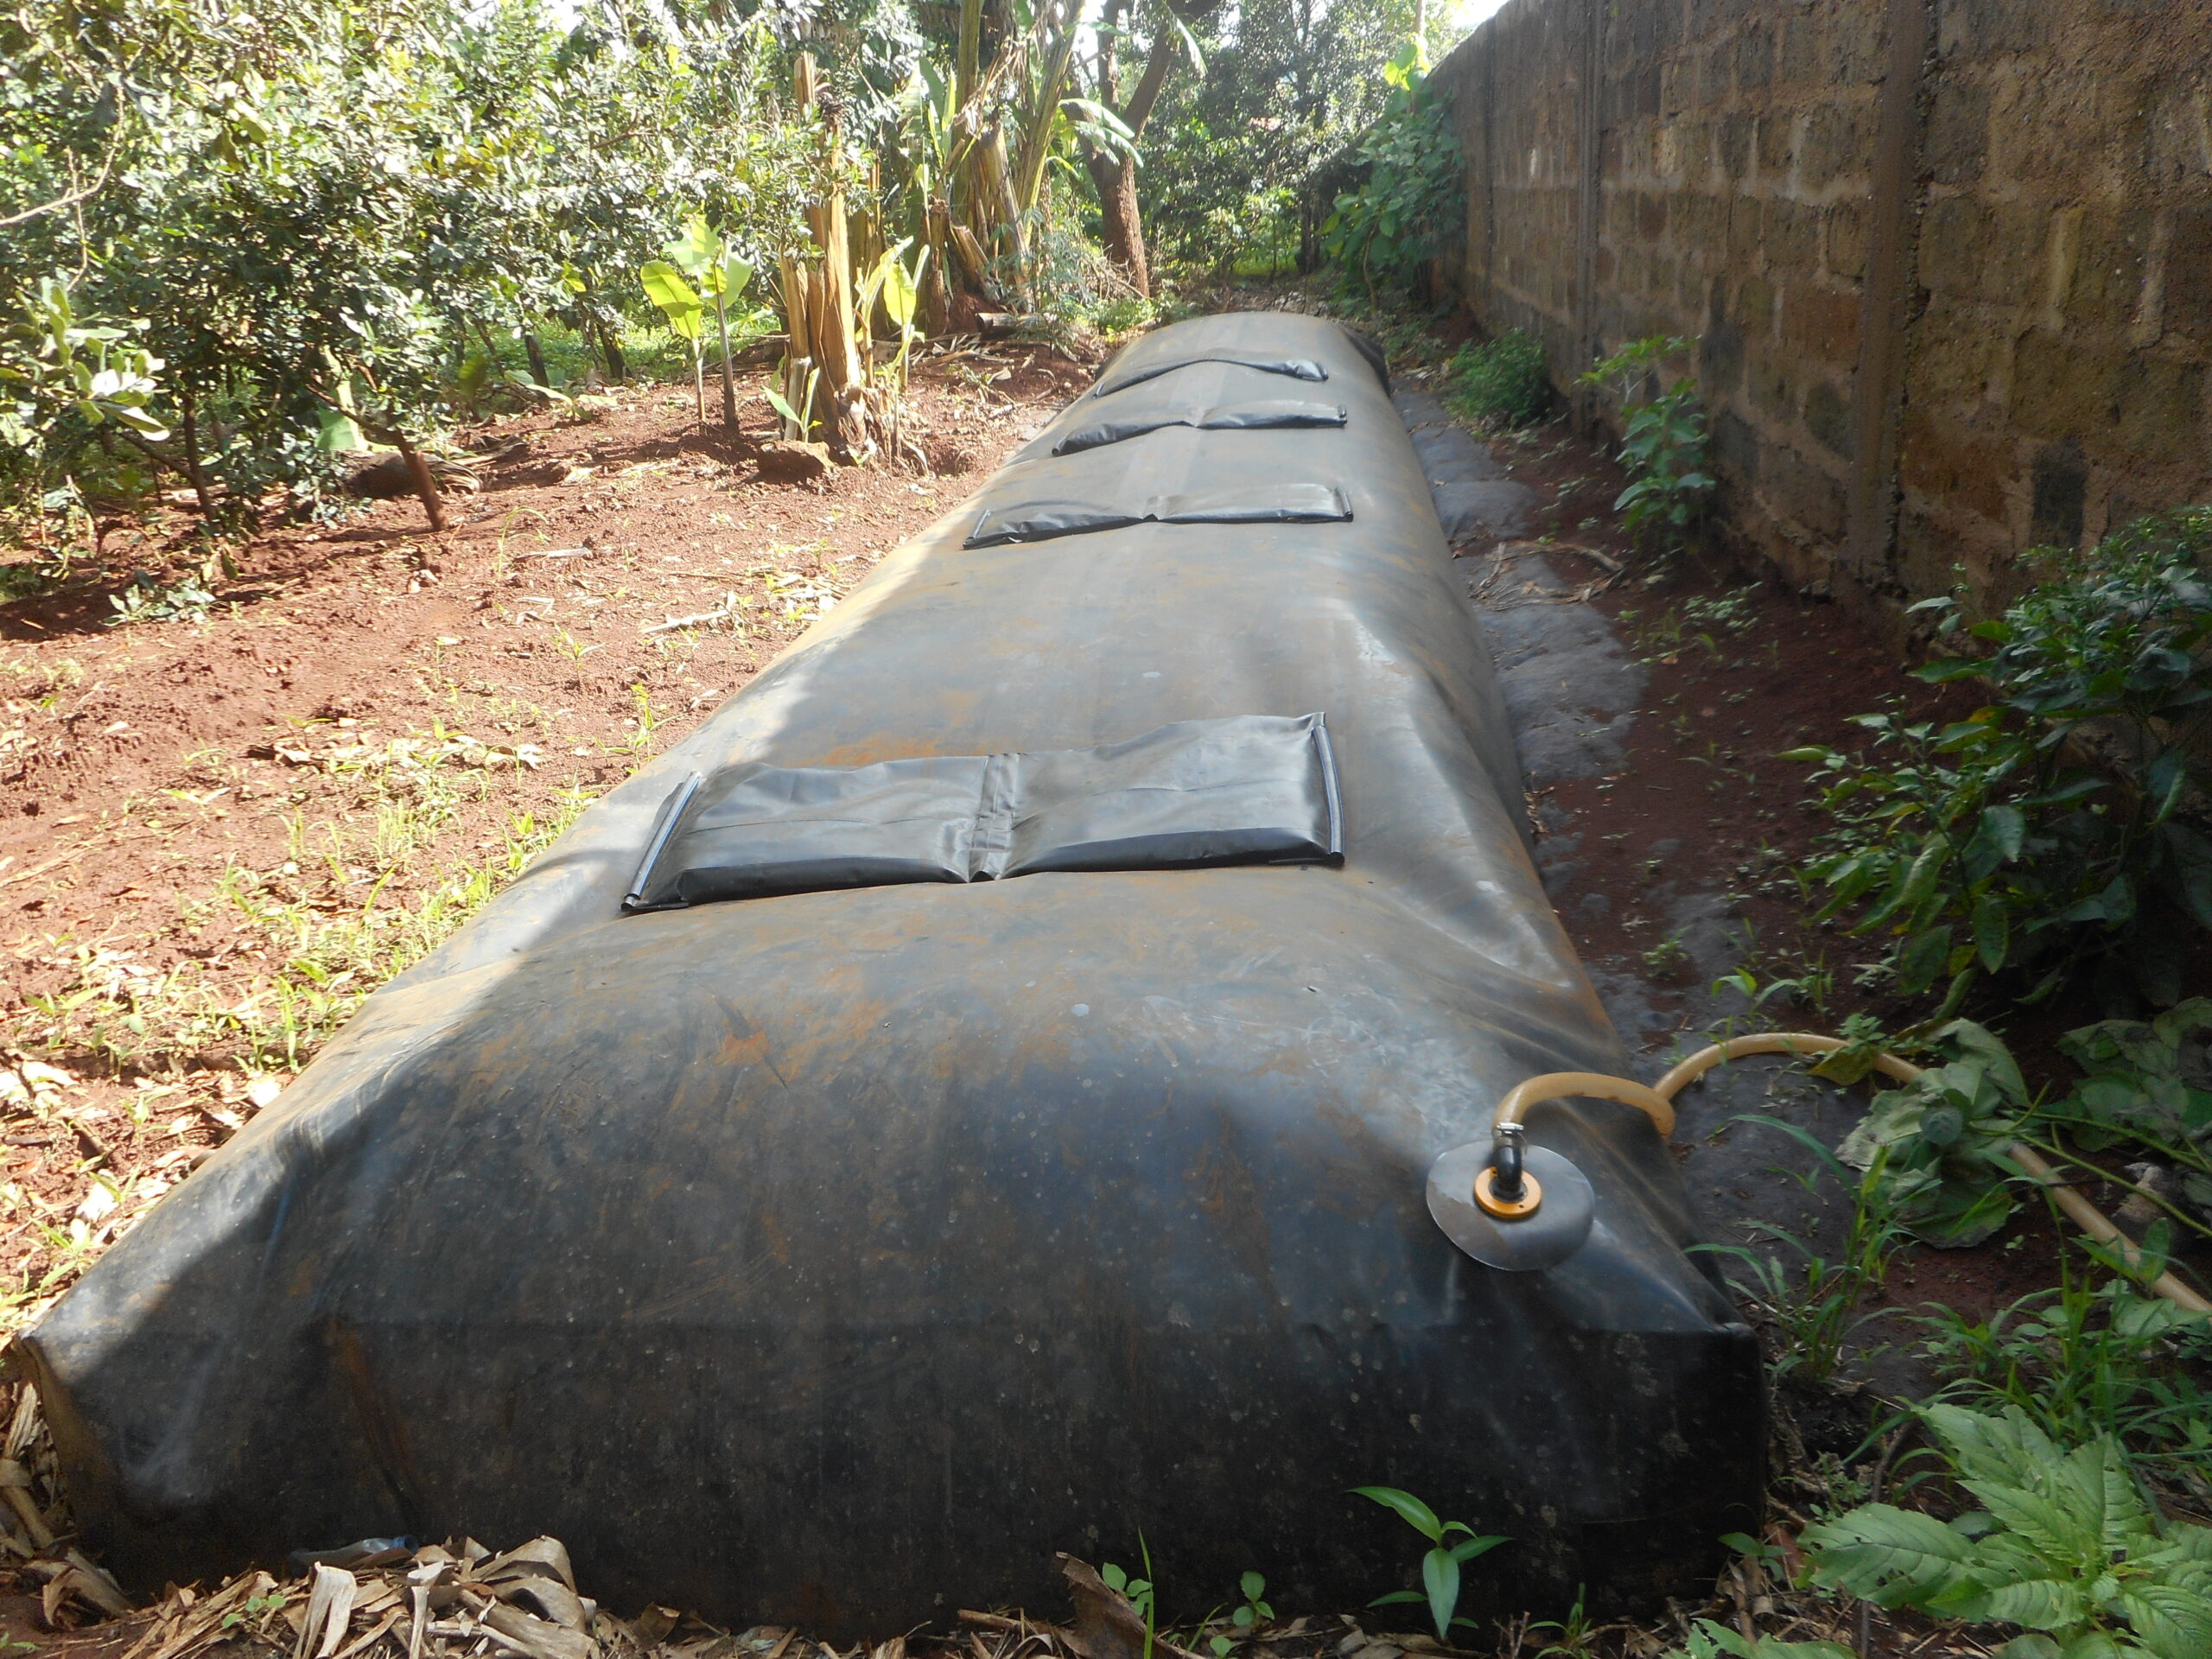 Caption: A biodigester—a prefabricated container that converts farm waste into organic fertilizer and clean fuel—in rural Kenya. Photo credit: Root Capital.